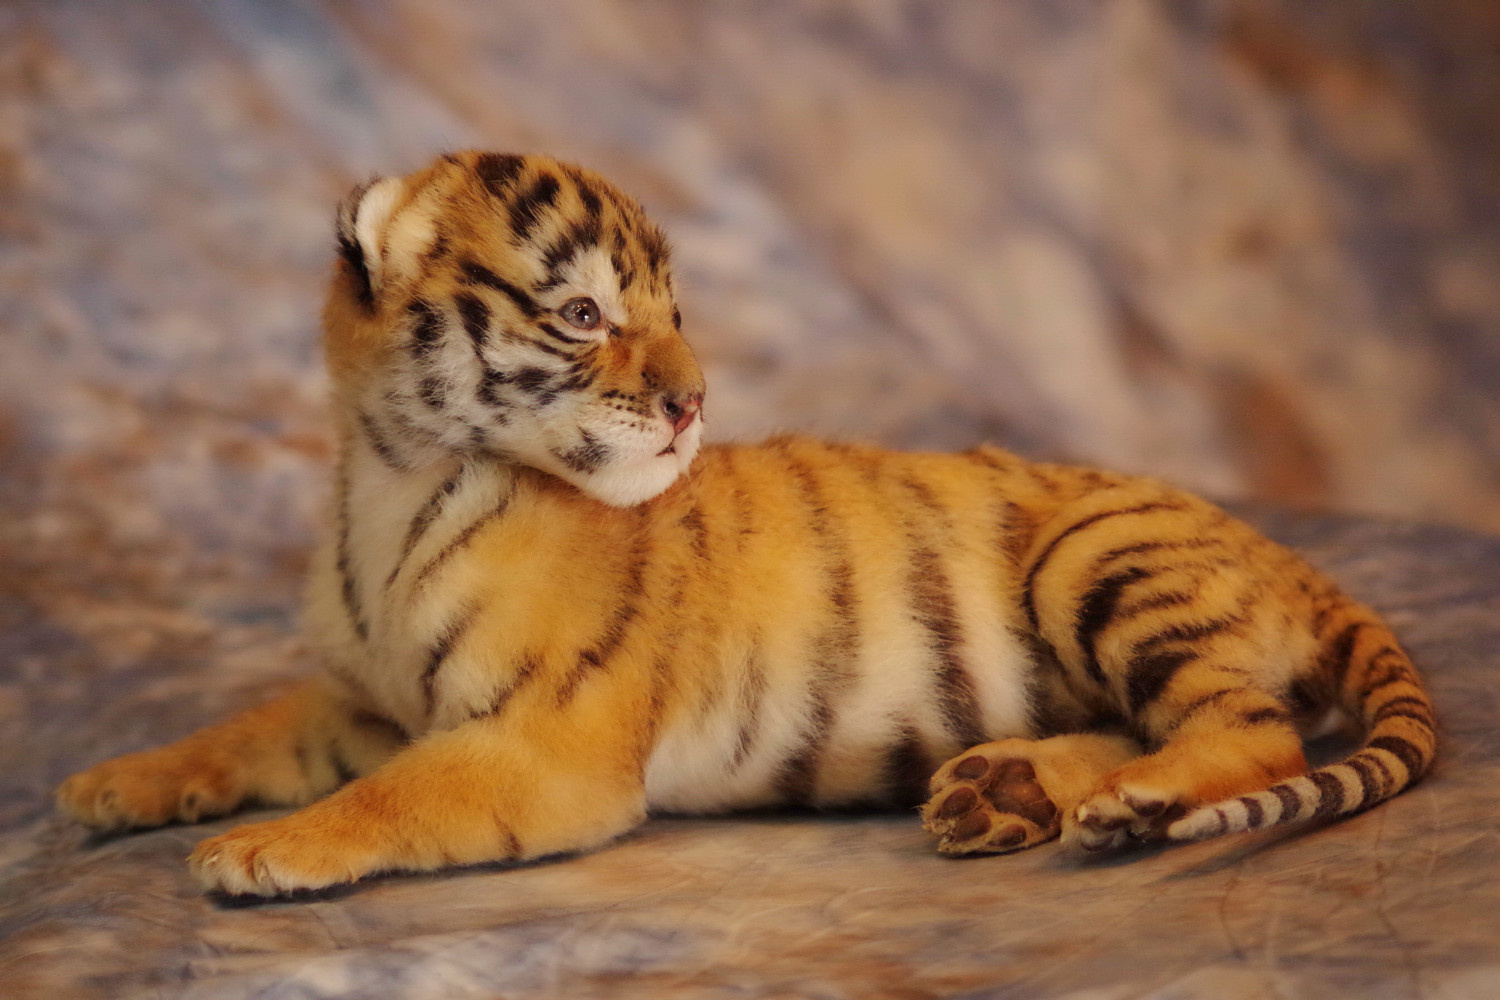 Donation - Dealer license # 43-c-0301. United States Dept. Agriculture. 

We were commissioned to mount this stillborn, captive bred baby tiger for a museum in the Midwest that promotes world-wide tiger conservation. 